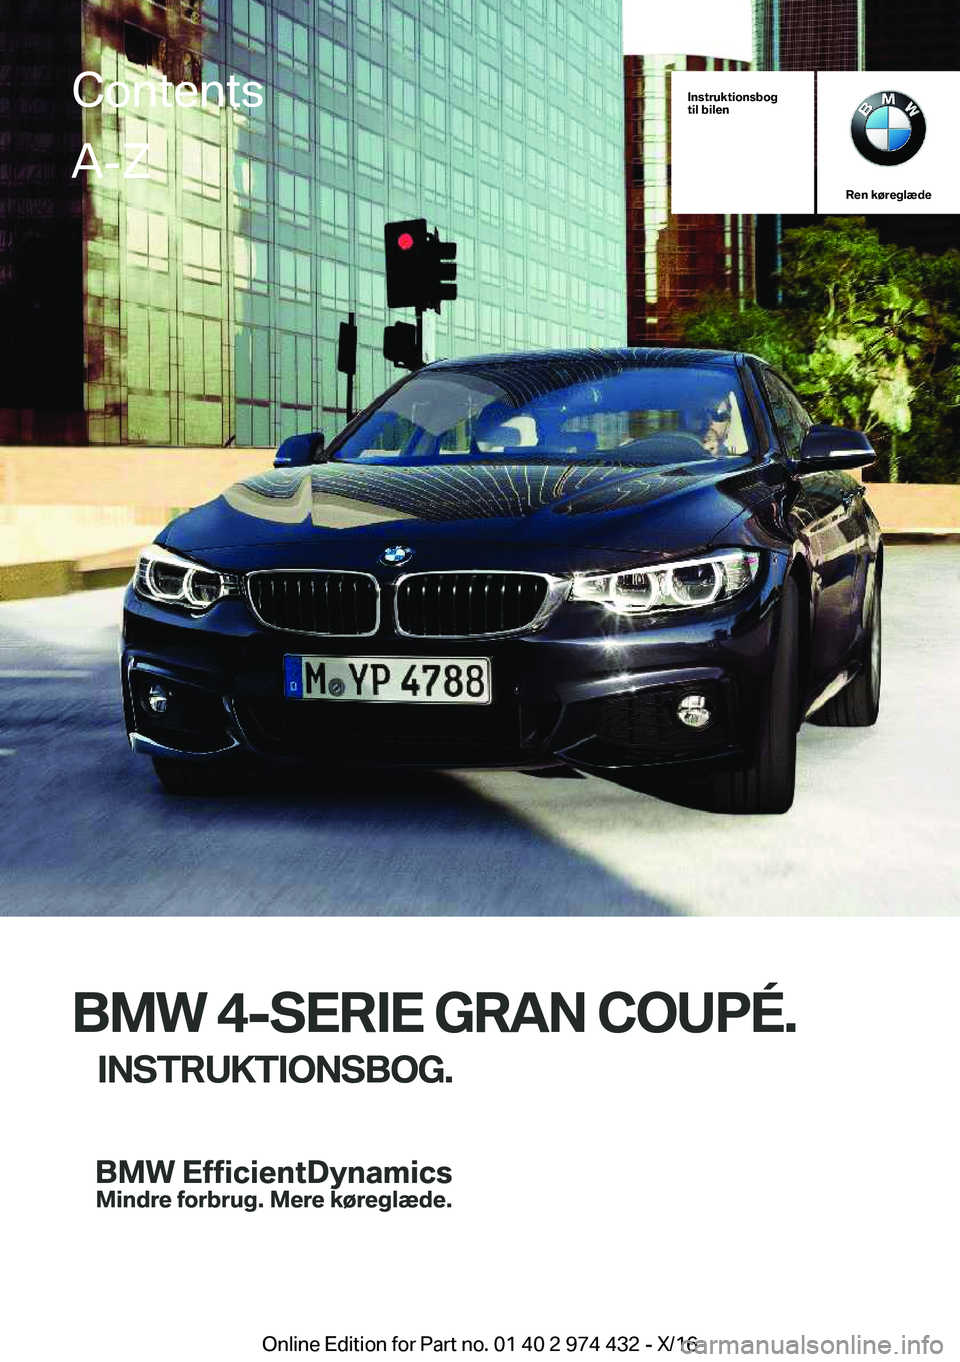 BMW 4 SERIES GRAN COUPE 2017  InstruktionsbØger (in Danish) �I�n�s�t�r�u�k�t�i�o�n�s�b�o�g
�t�i�l��b�i�l�e�n
�R�e�n��k�